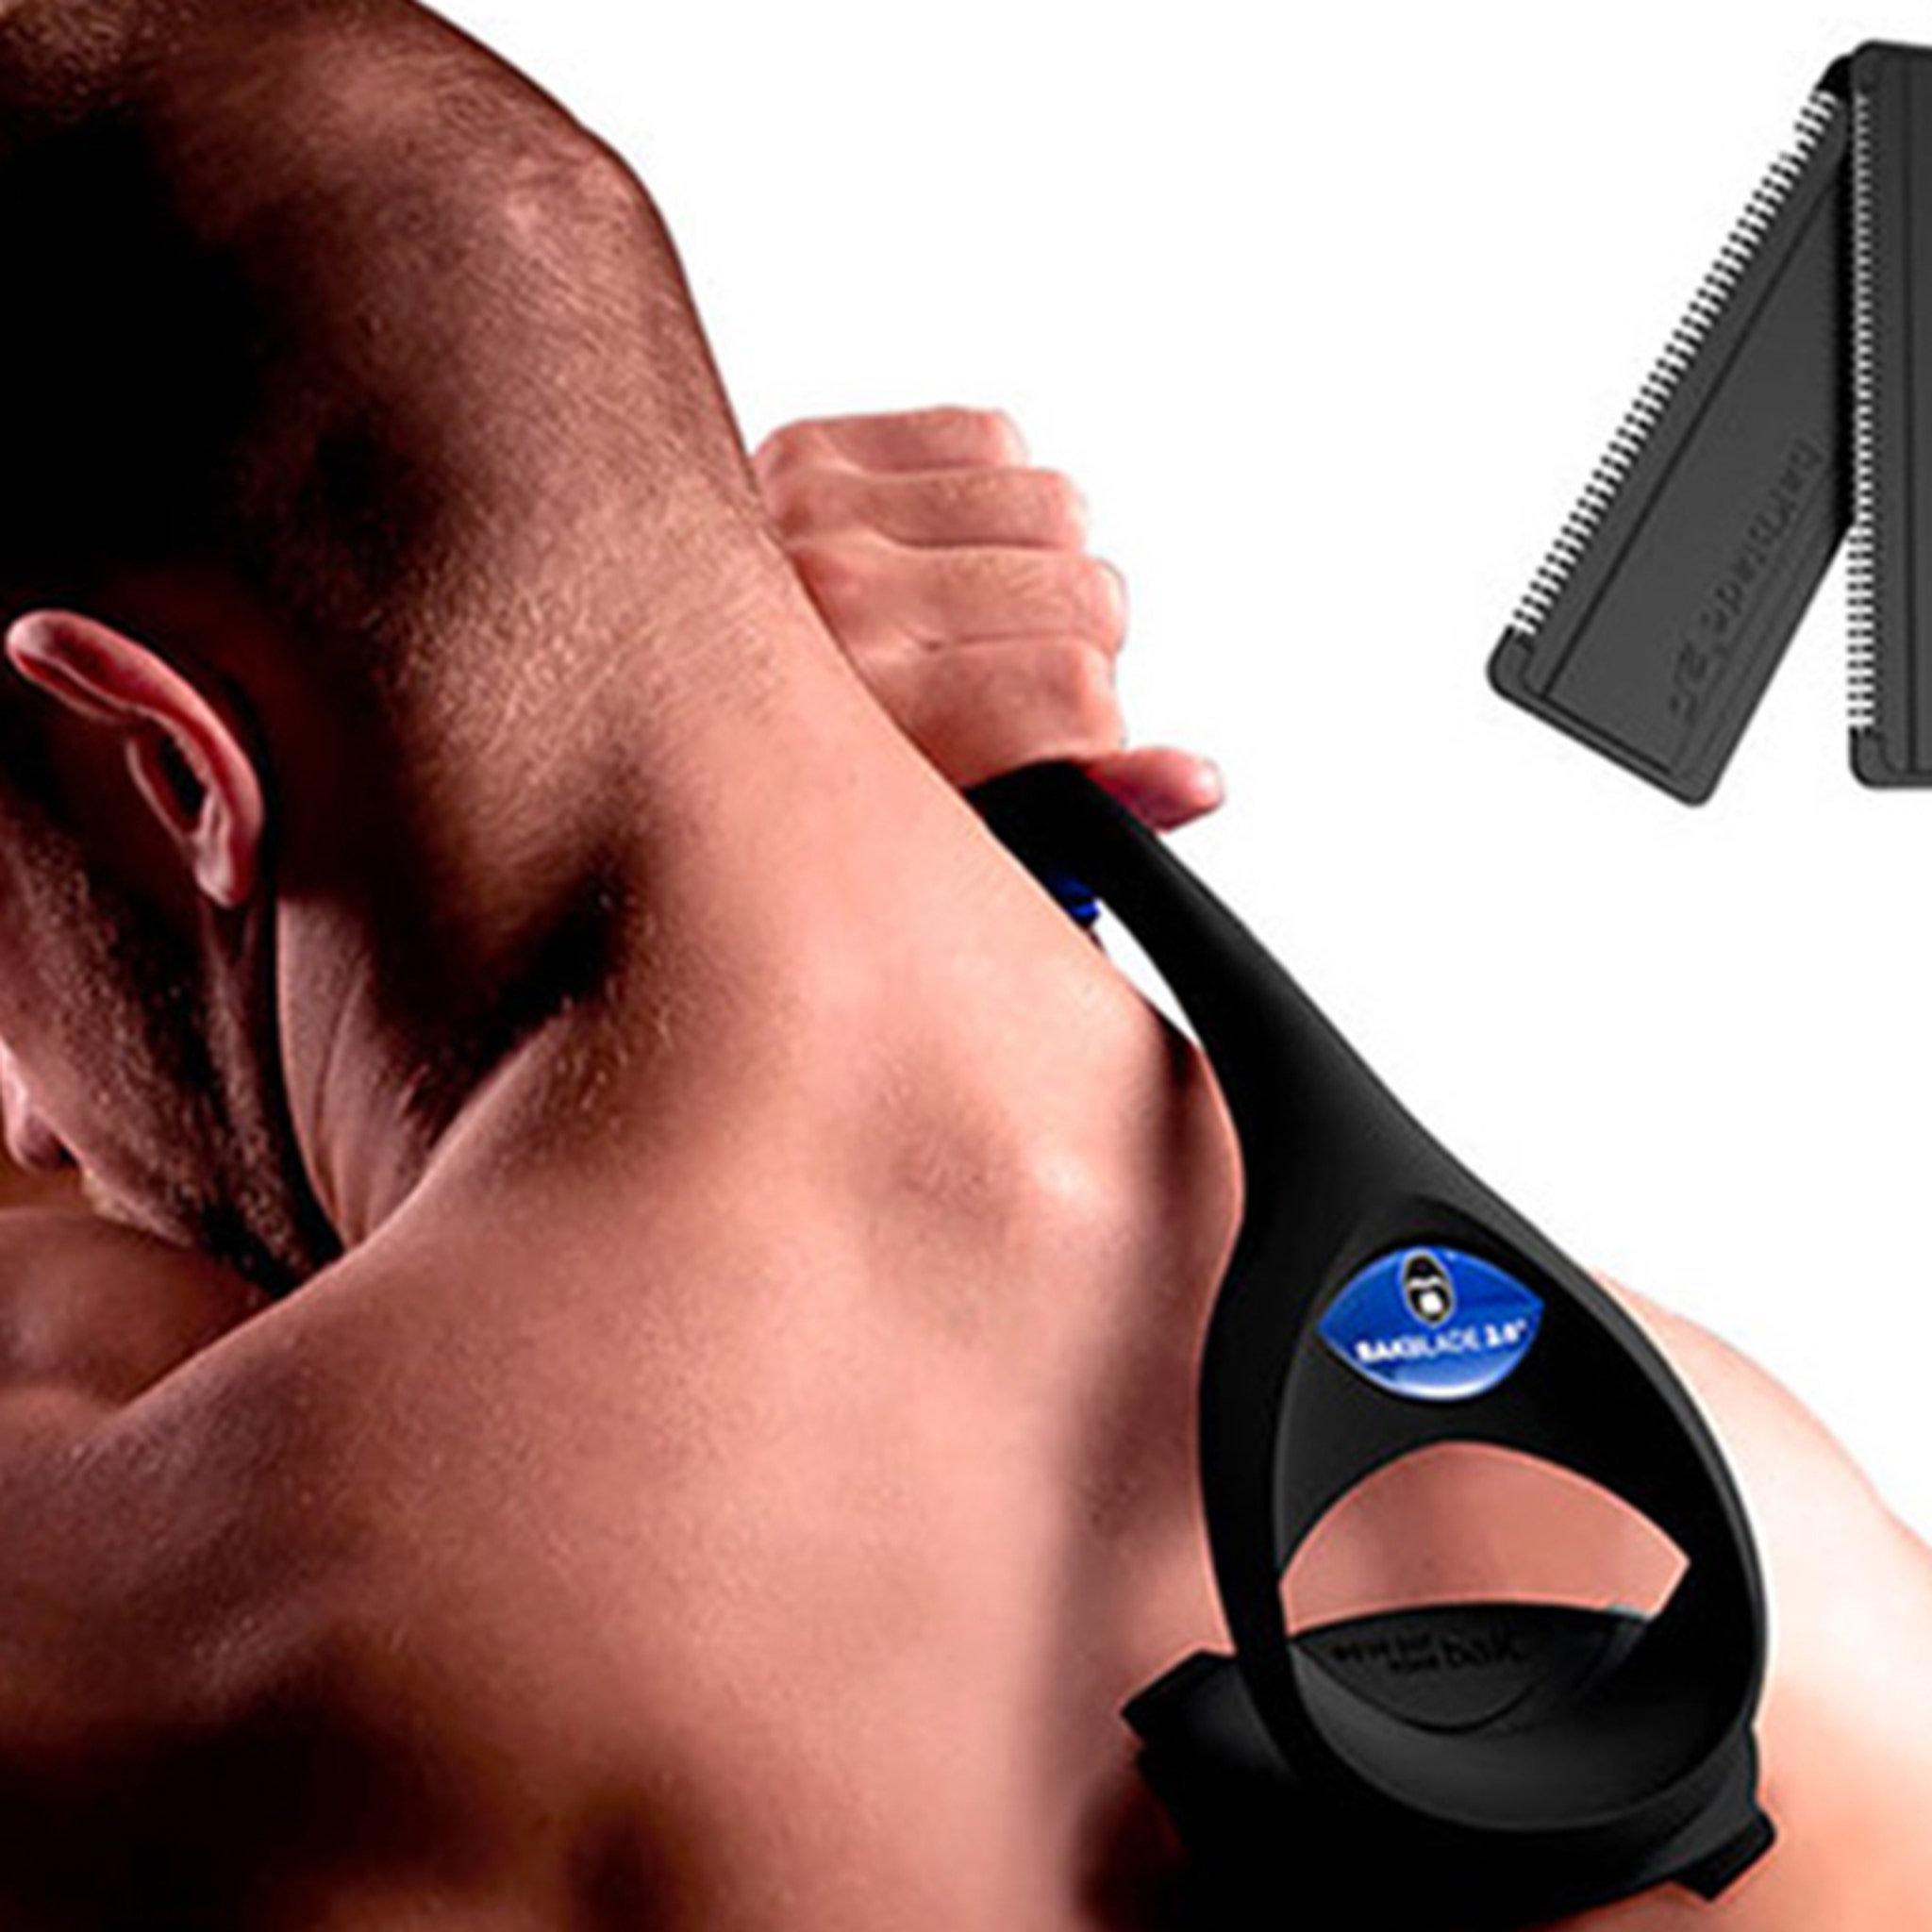 This Body Shaver Will Get The Job Done For Less!